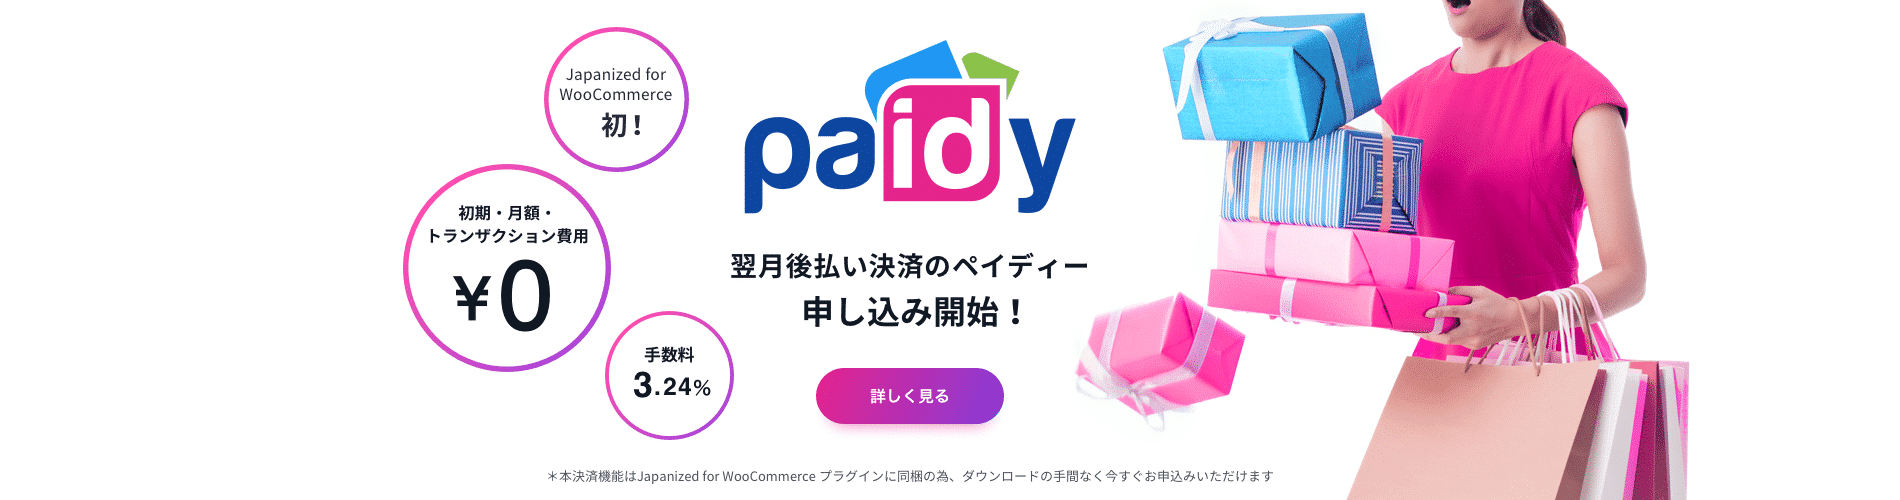 Paidy for WooCommerce